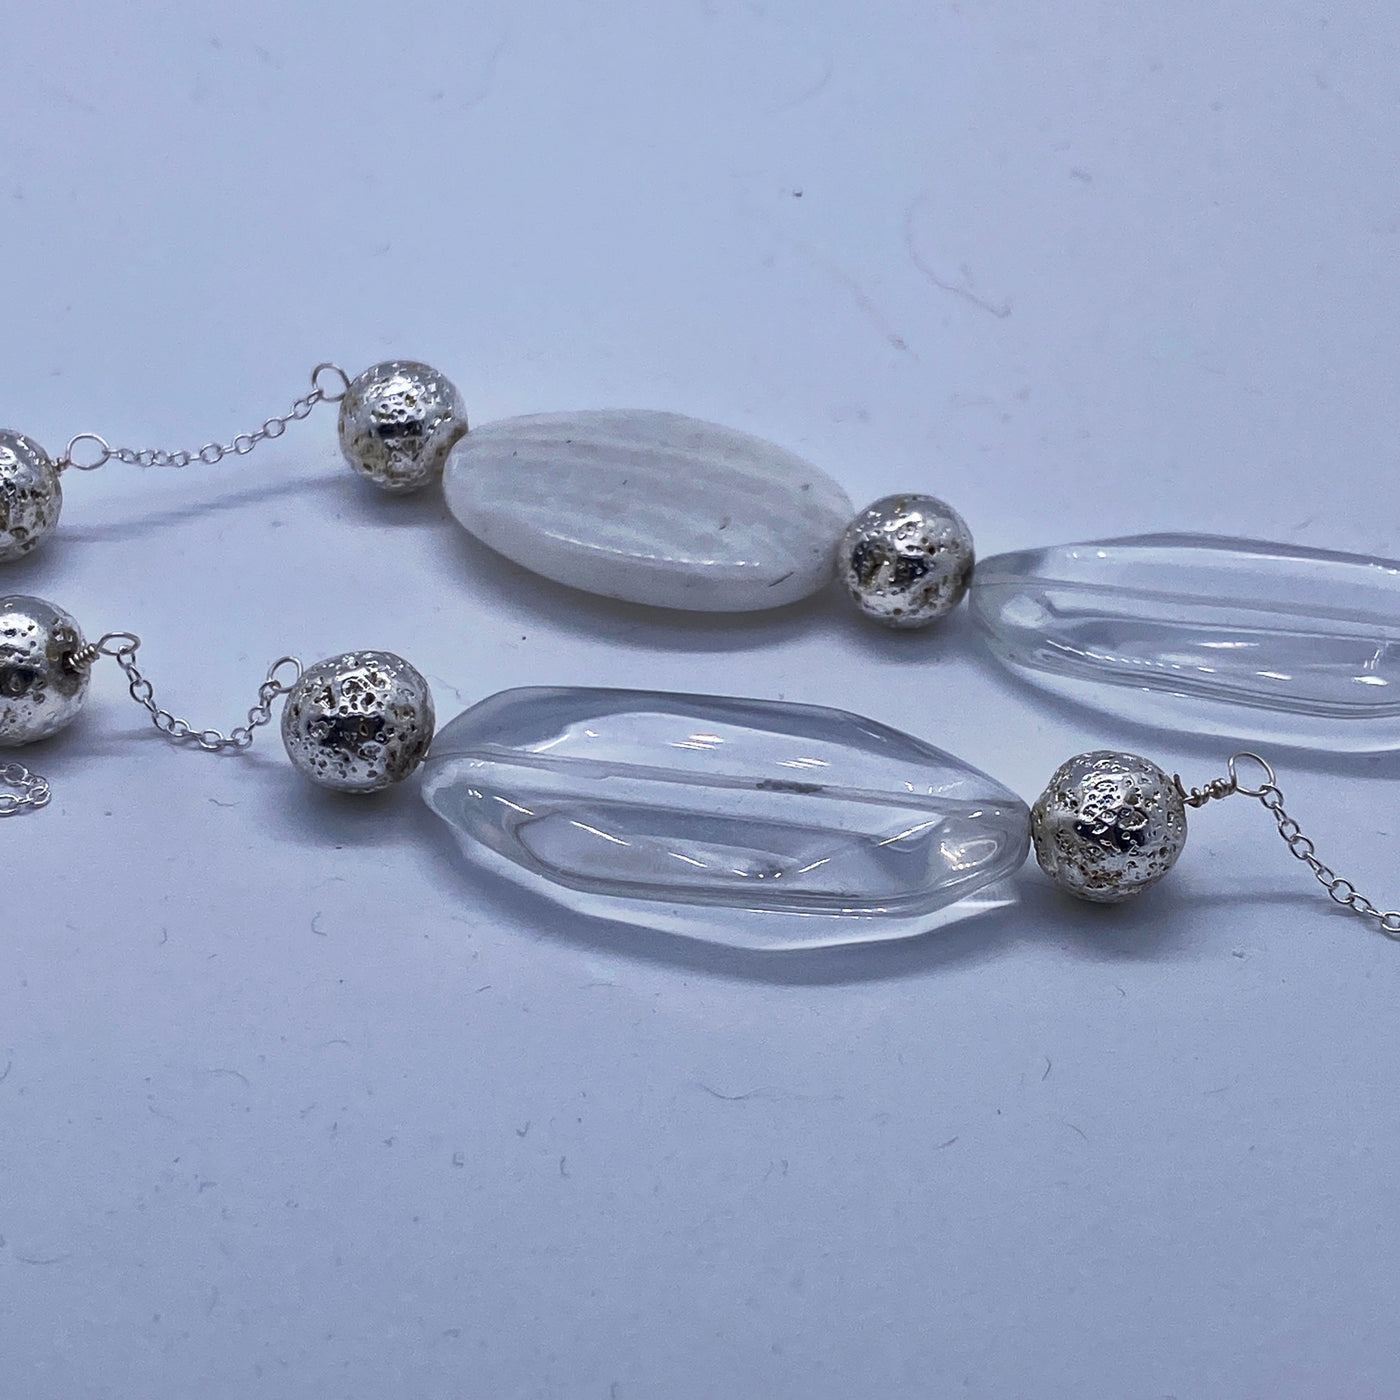 Transparent and white glass necklace